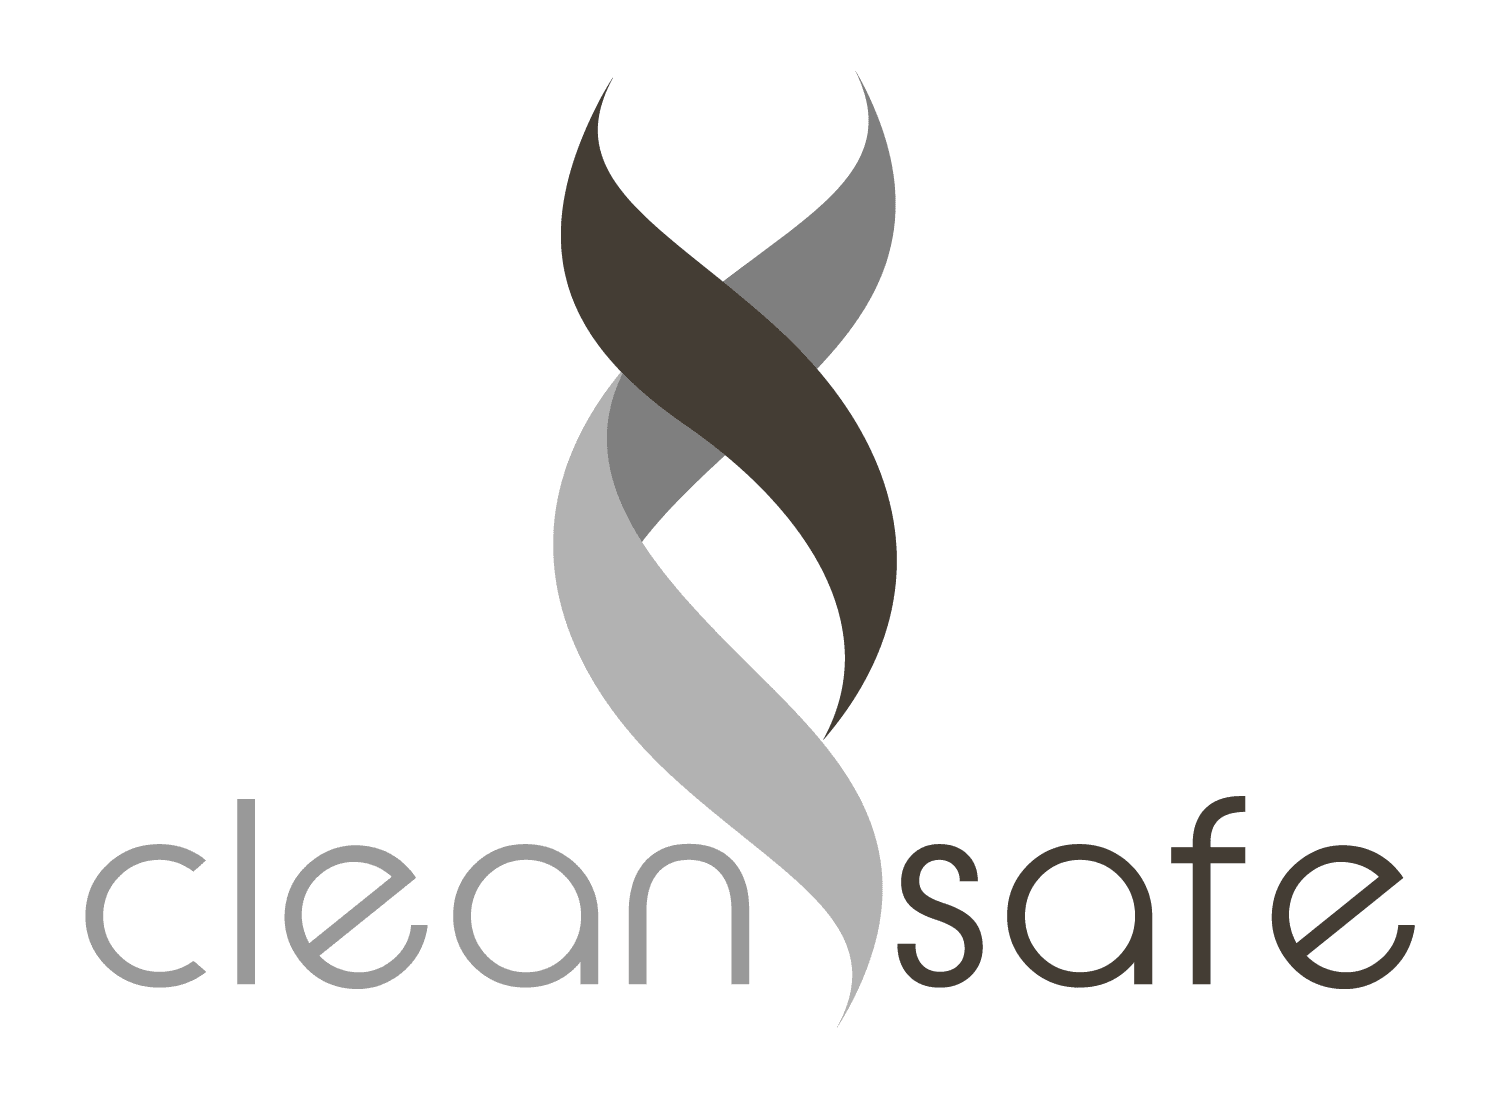 (c) Clean-and-safe.net